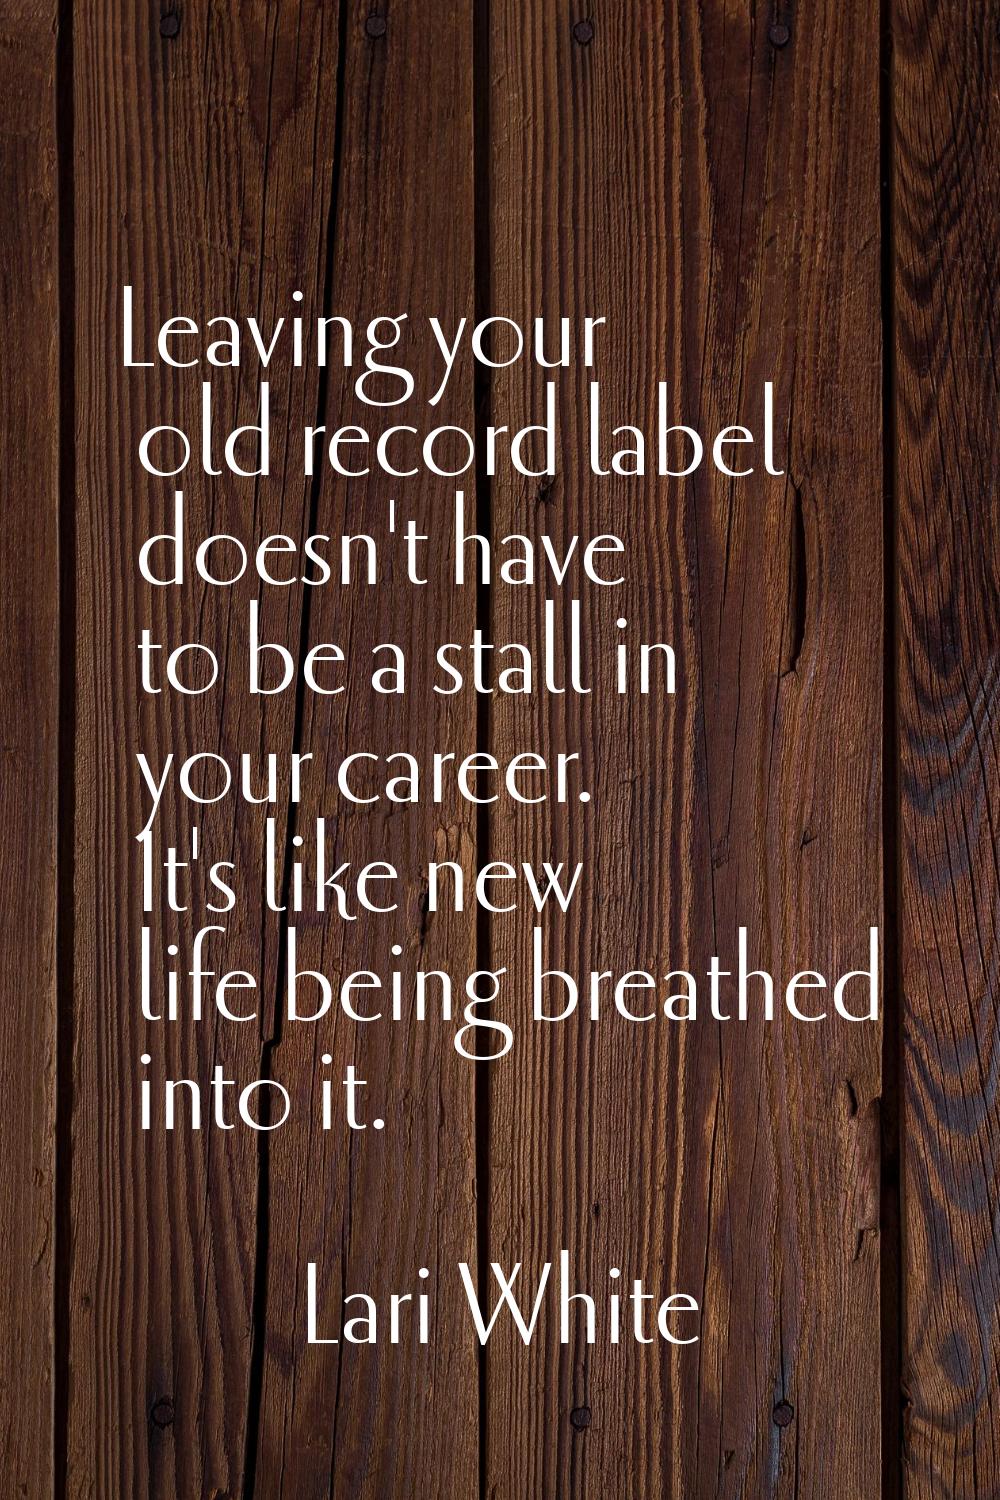 Leaving your old record label doesn't have to be a stall in your career. It's like new life being b